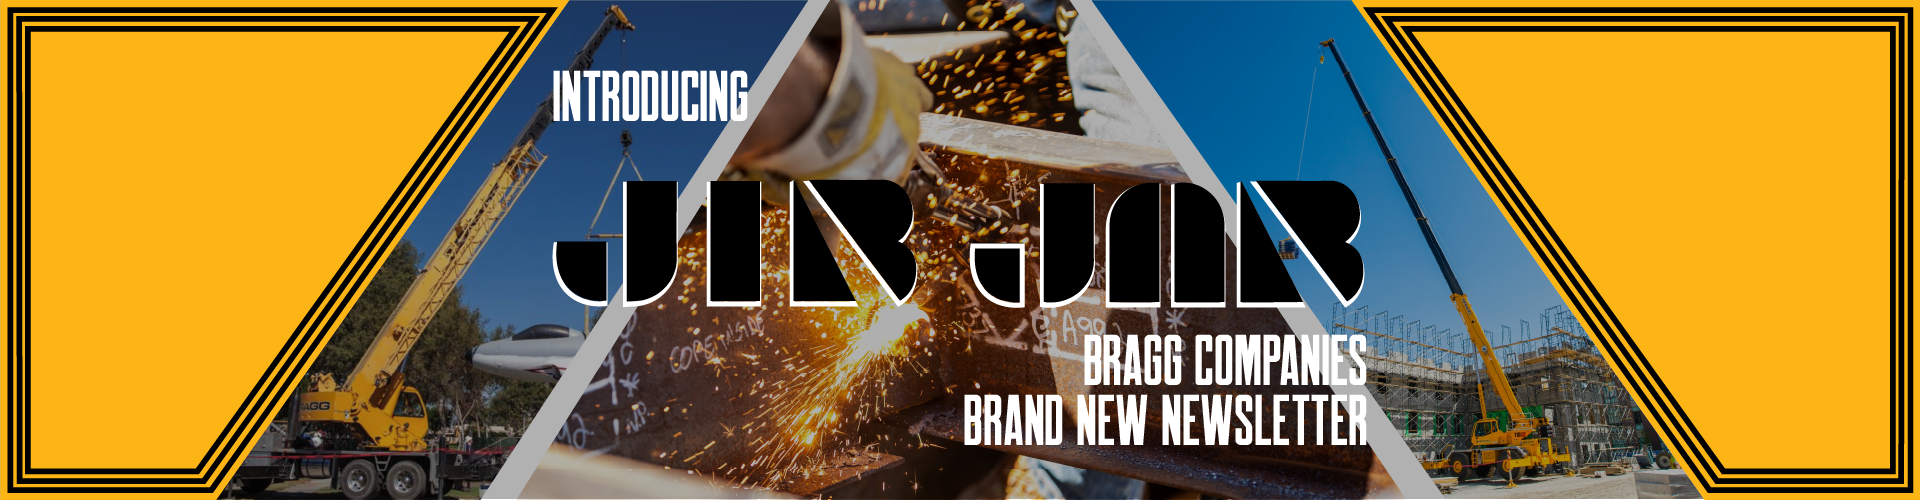 BRAGG COMPANIES NEW NEWSLETTER THE JIB JAB RELEASES Q1 ISSUE